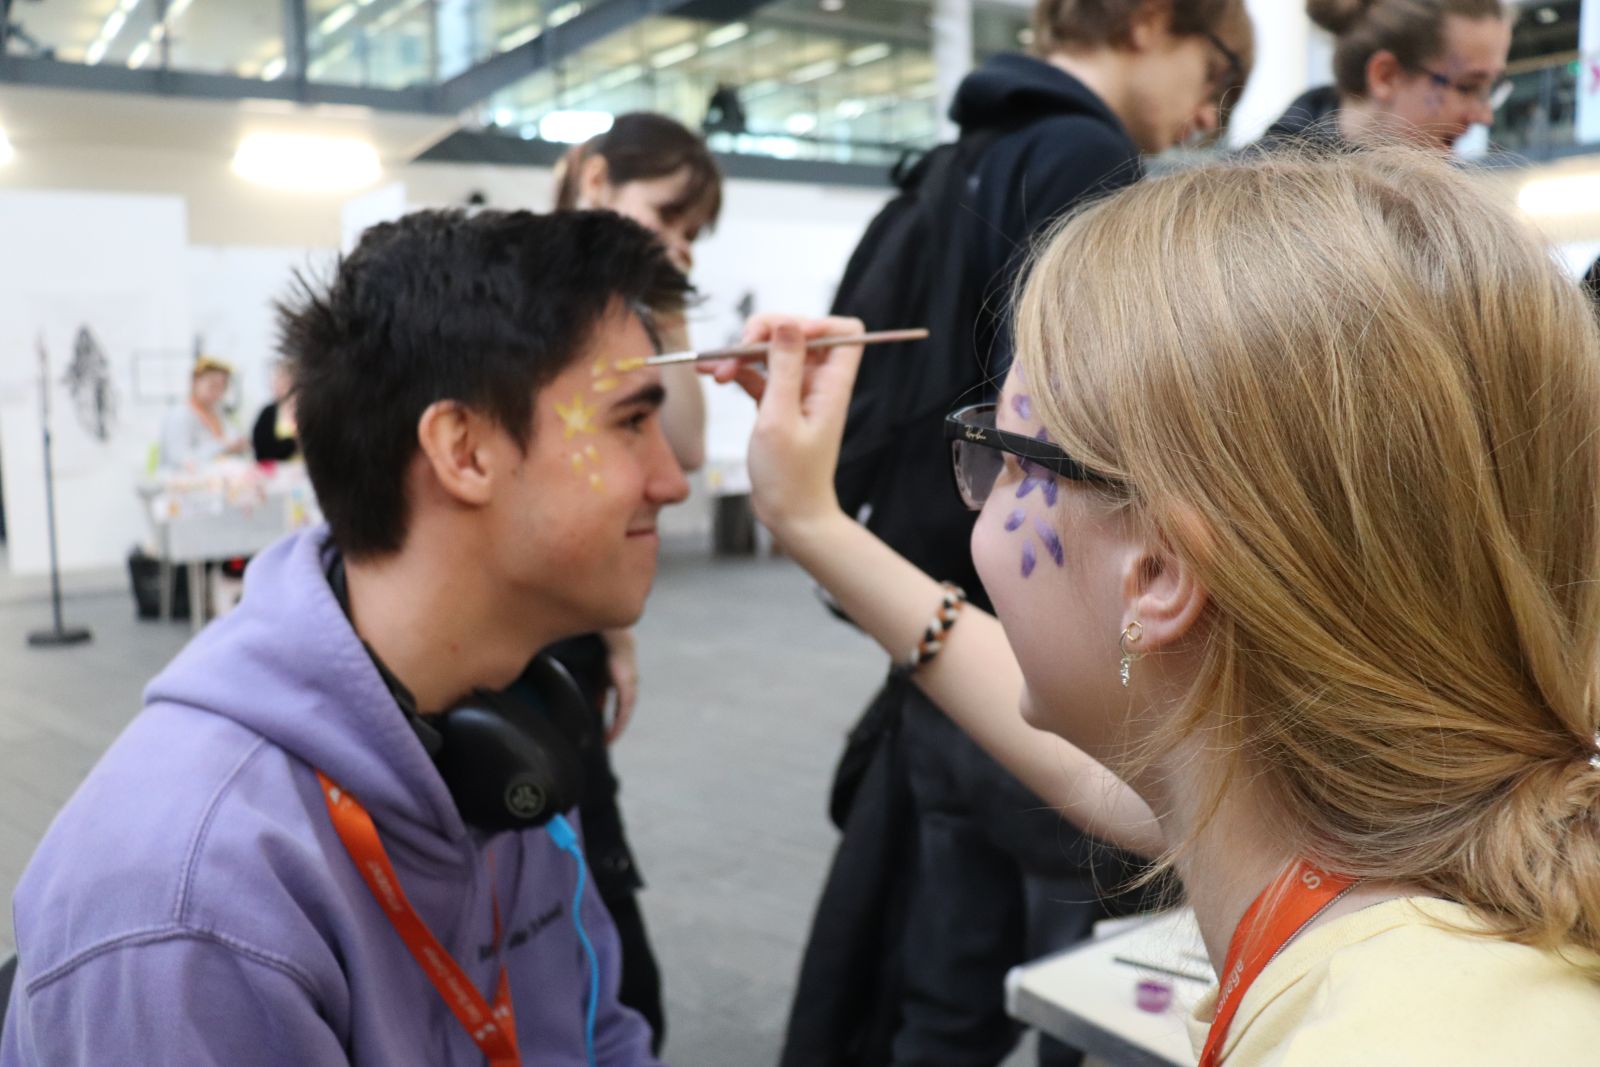 STUDENT FACE PAINTING